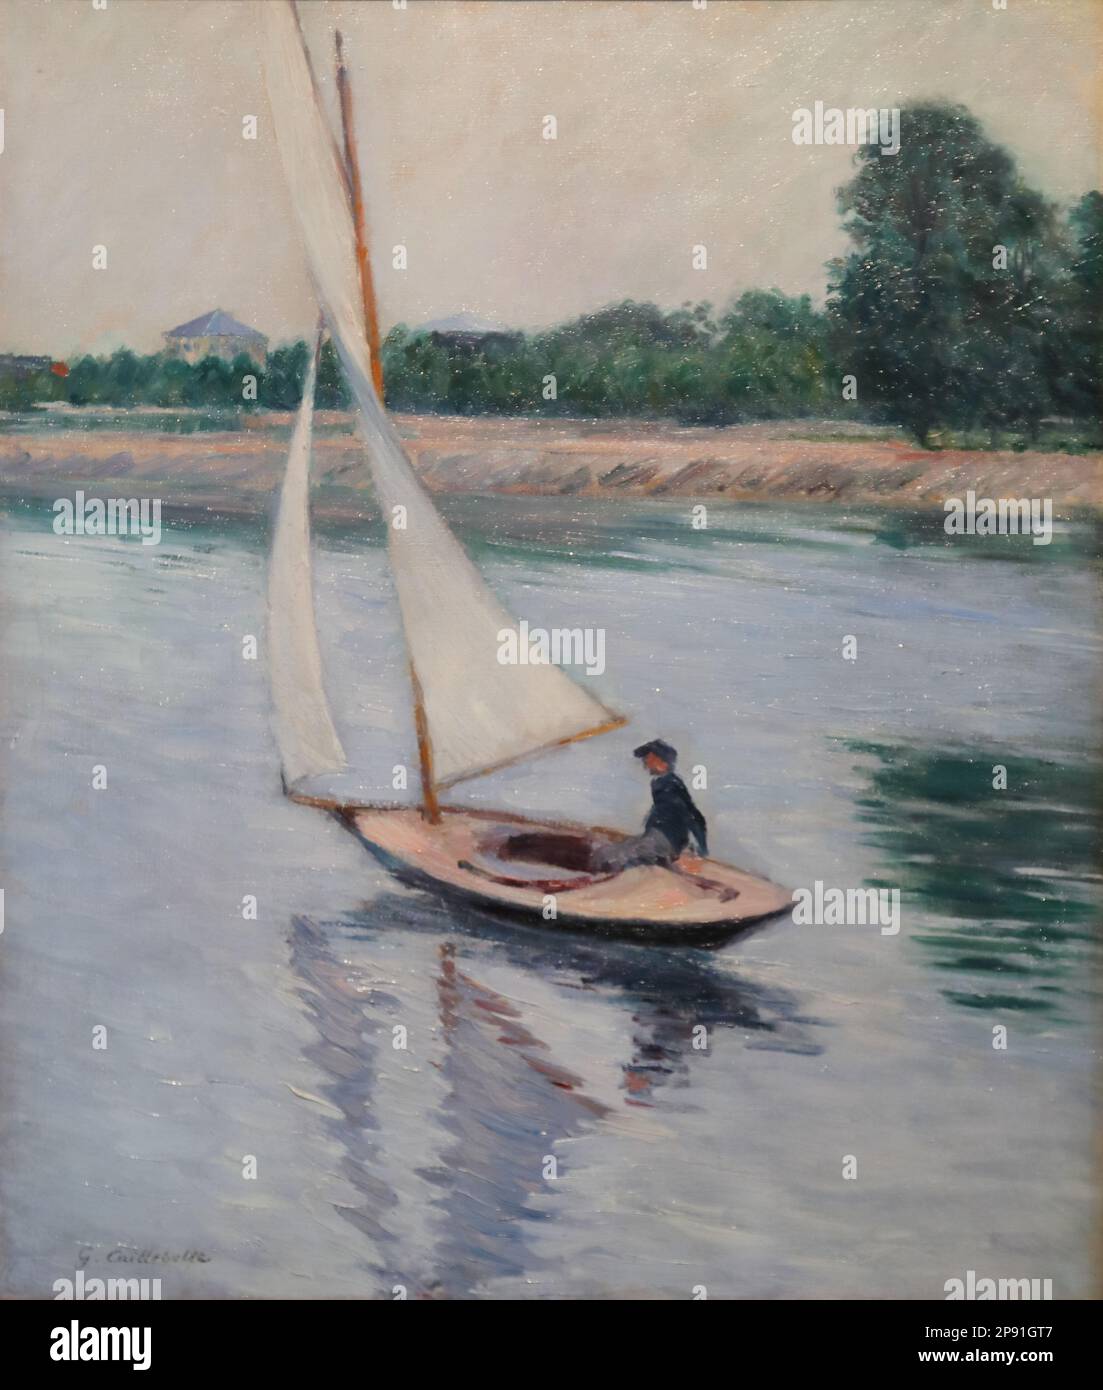 Sailboat on the Seine at Argenteuil (Segelboot auf der Seine bei Argenteuil) by French Impressionist painter Gustave Caillebotte at the Wallraf-Richartz Museum, Cologne, Germany Stock Photo